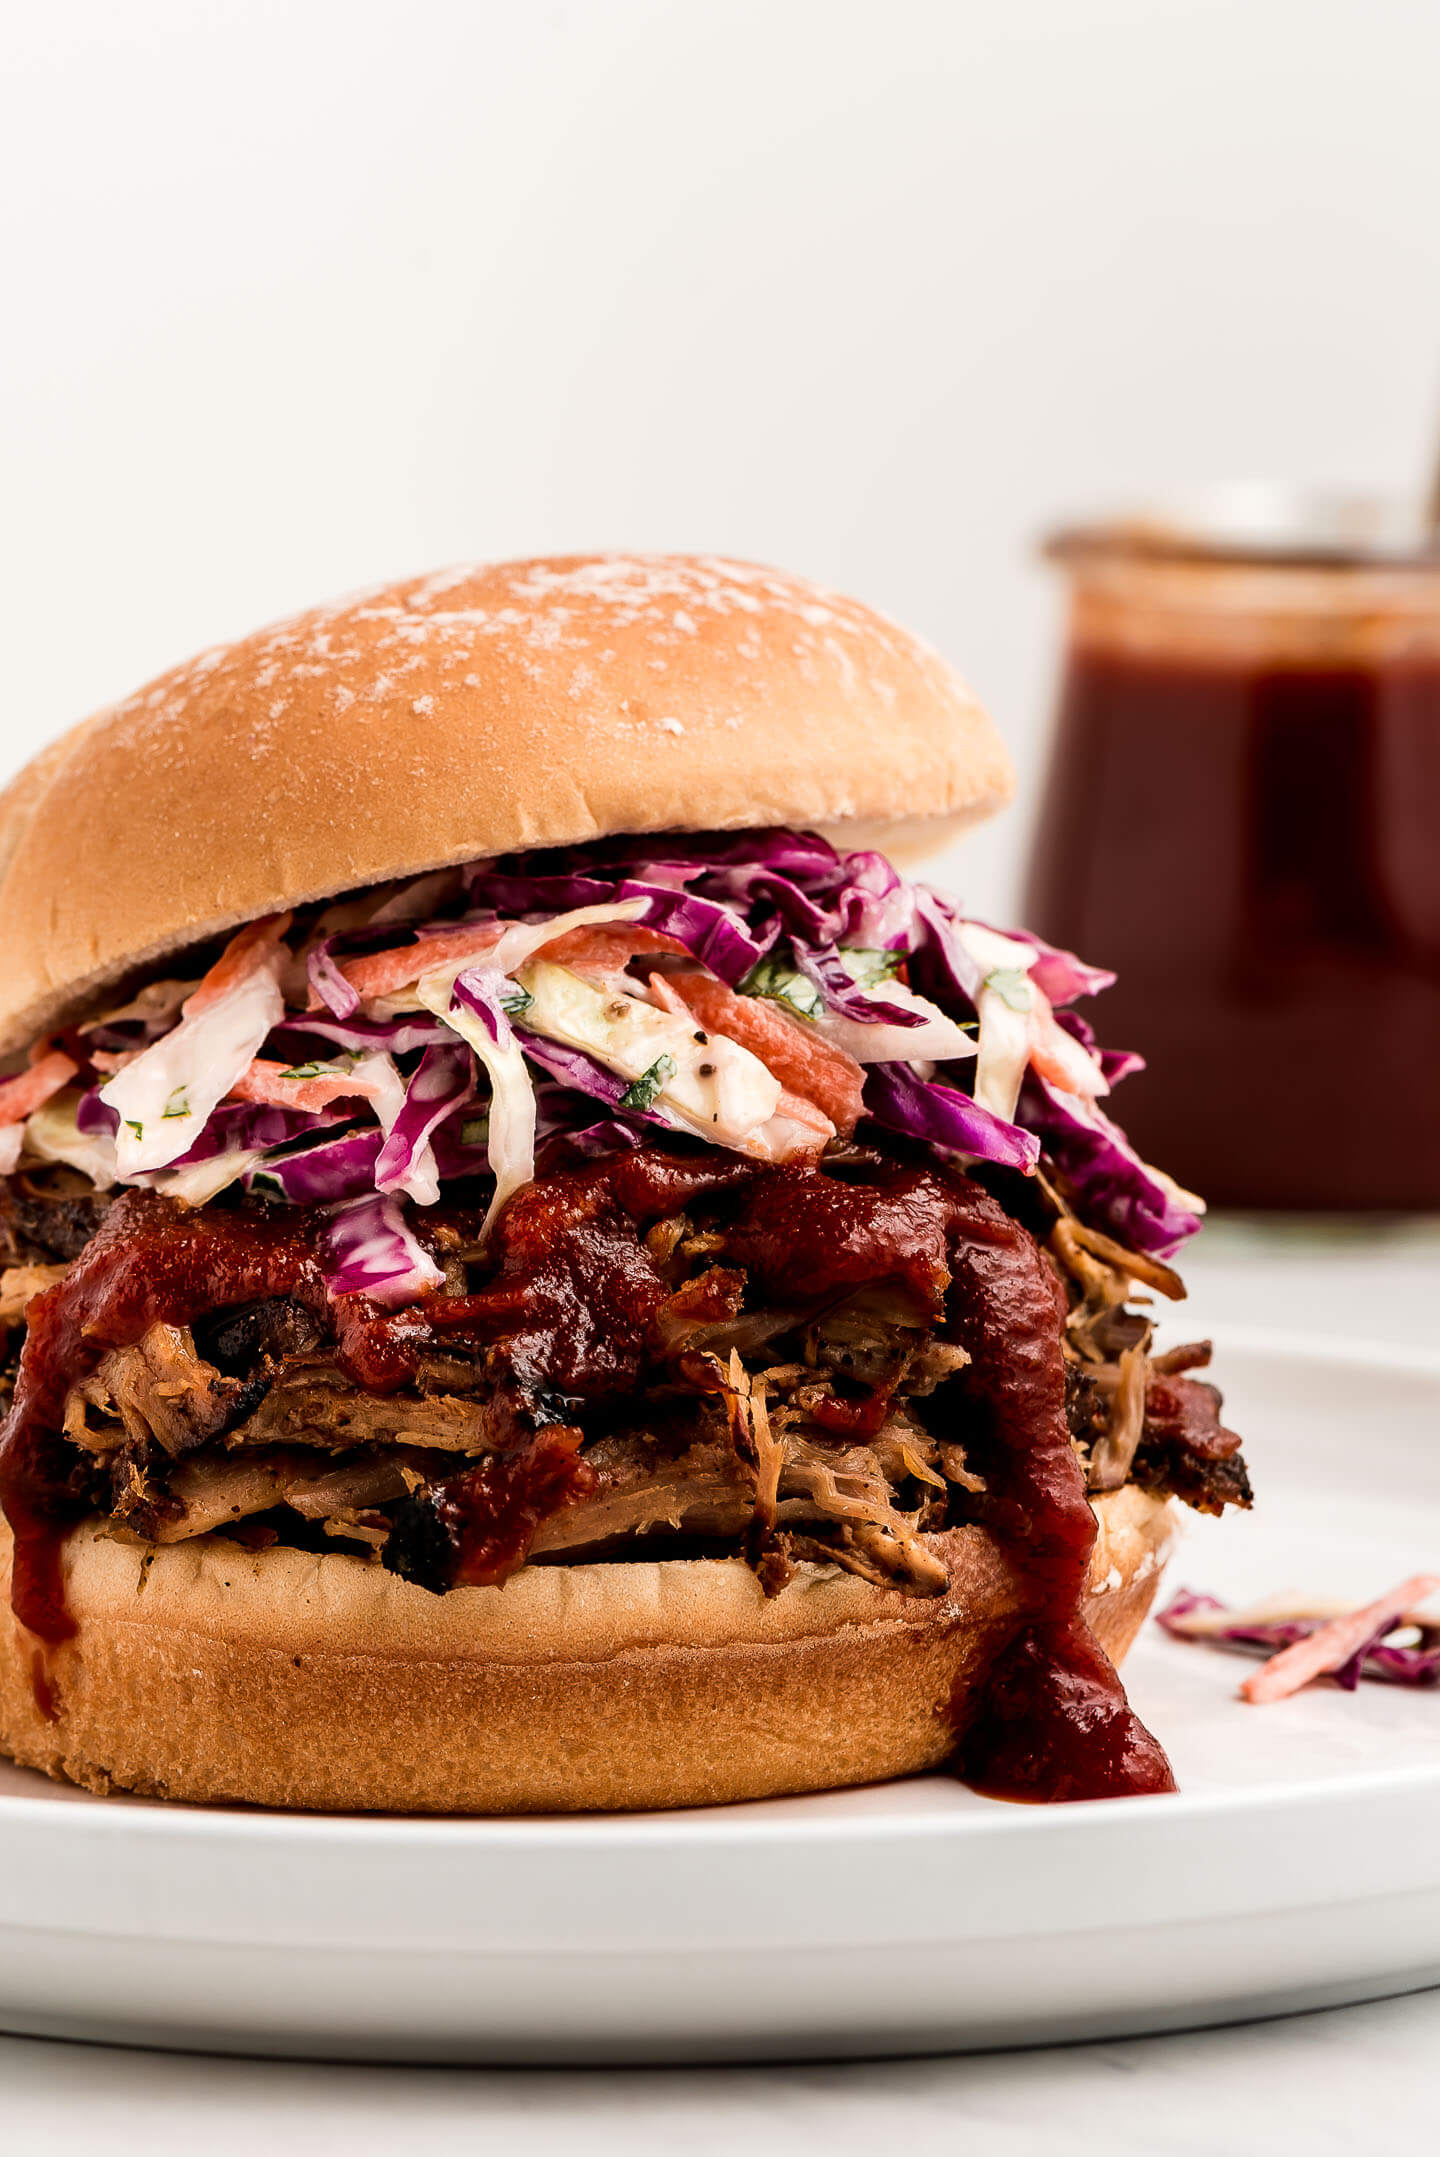 A close up shot of a pulled pork sandwich with coleslaw on it.